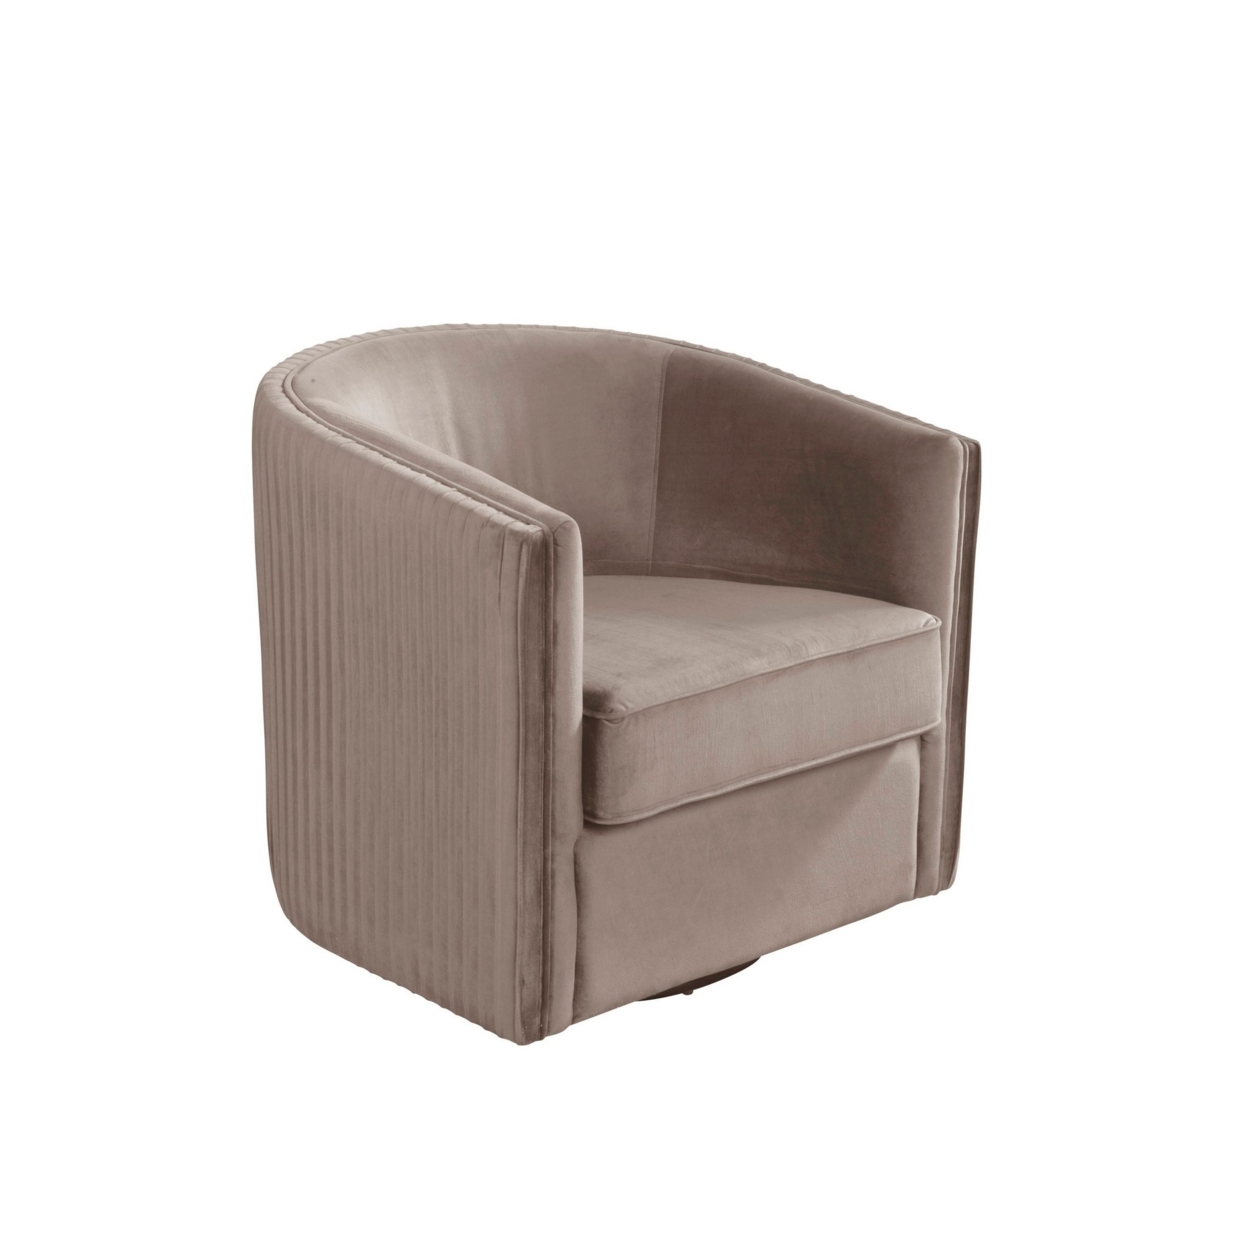 Swivel Chair With Fabric Seat And Curved Back, Light Gray- Saltoro Sherpi